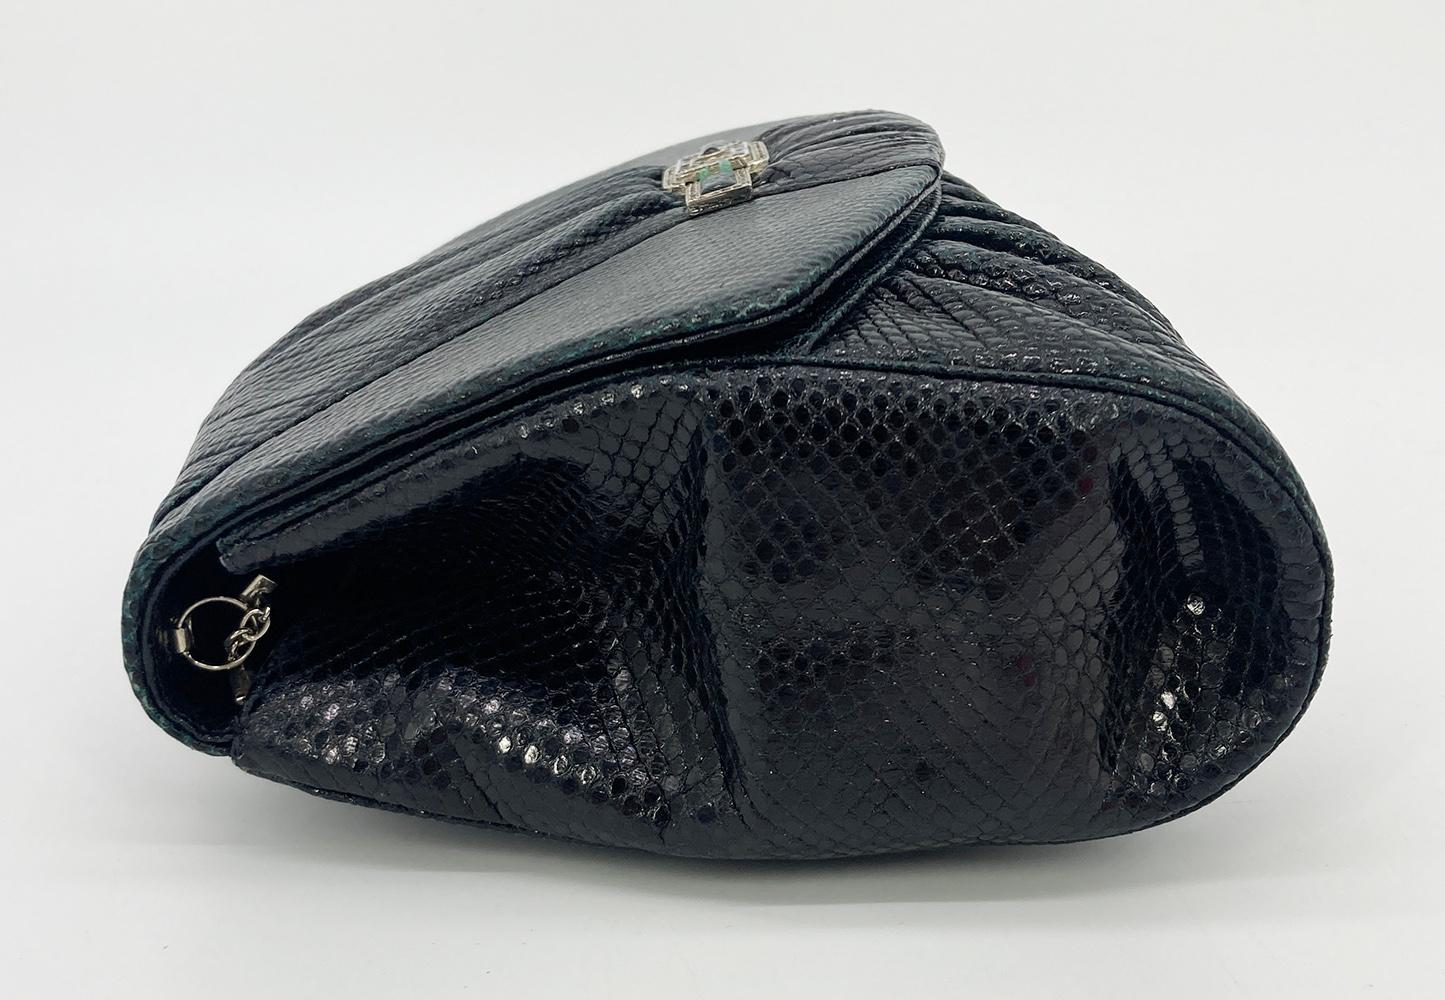 Judith Leiber Black Lizard Top Flap Bag In Excellent Condition For Sale In Philadelphia, PA